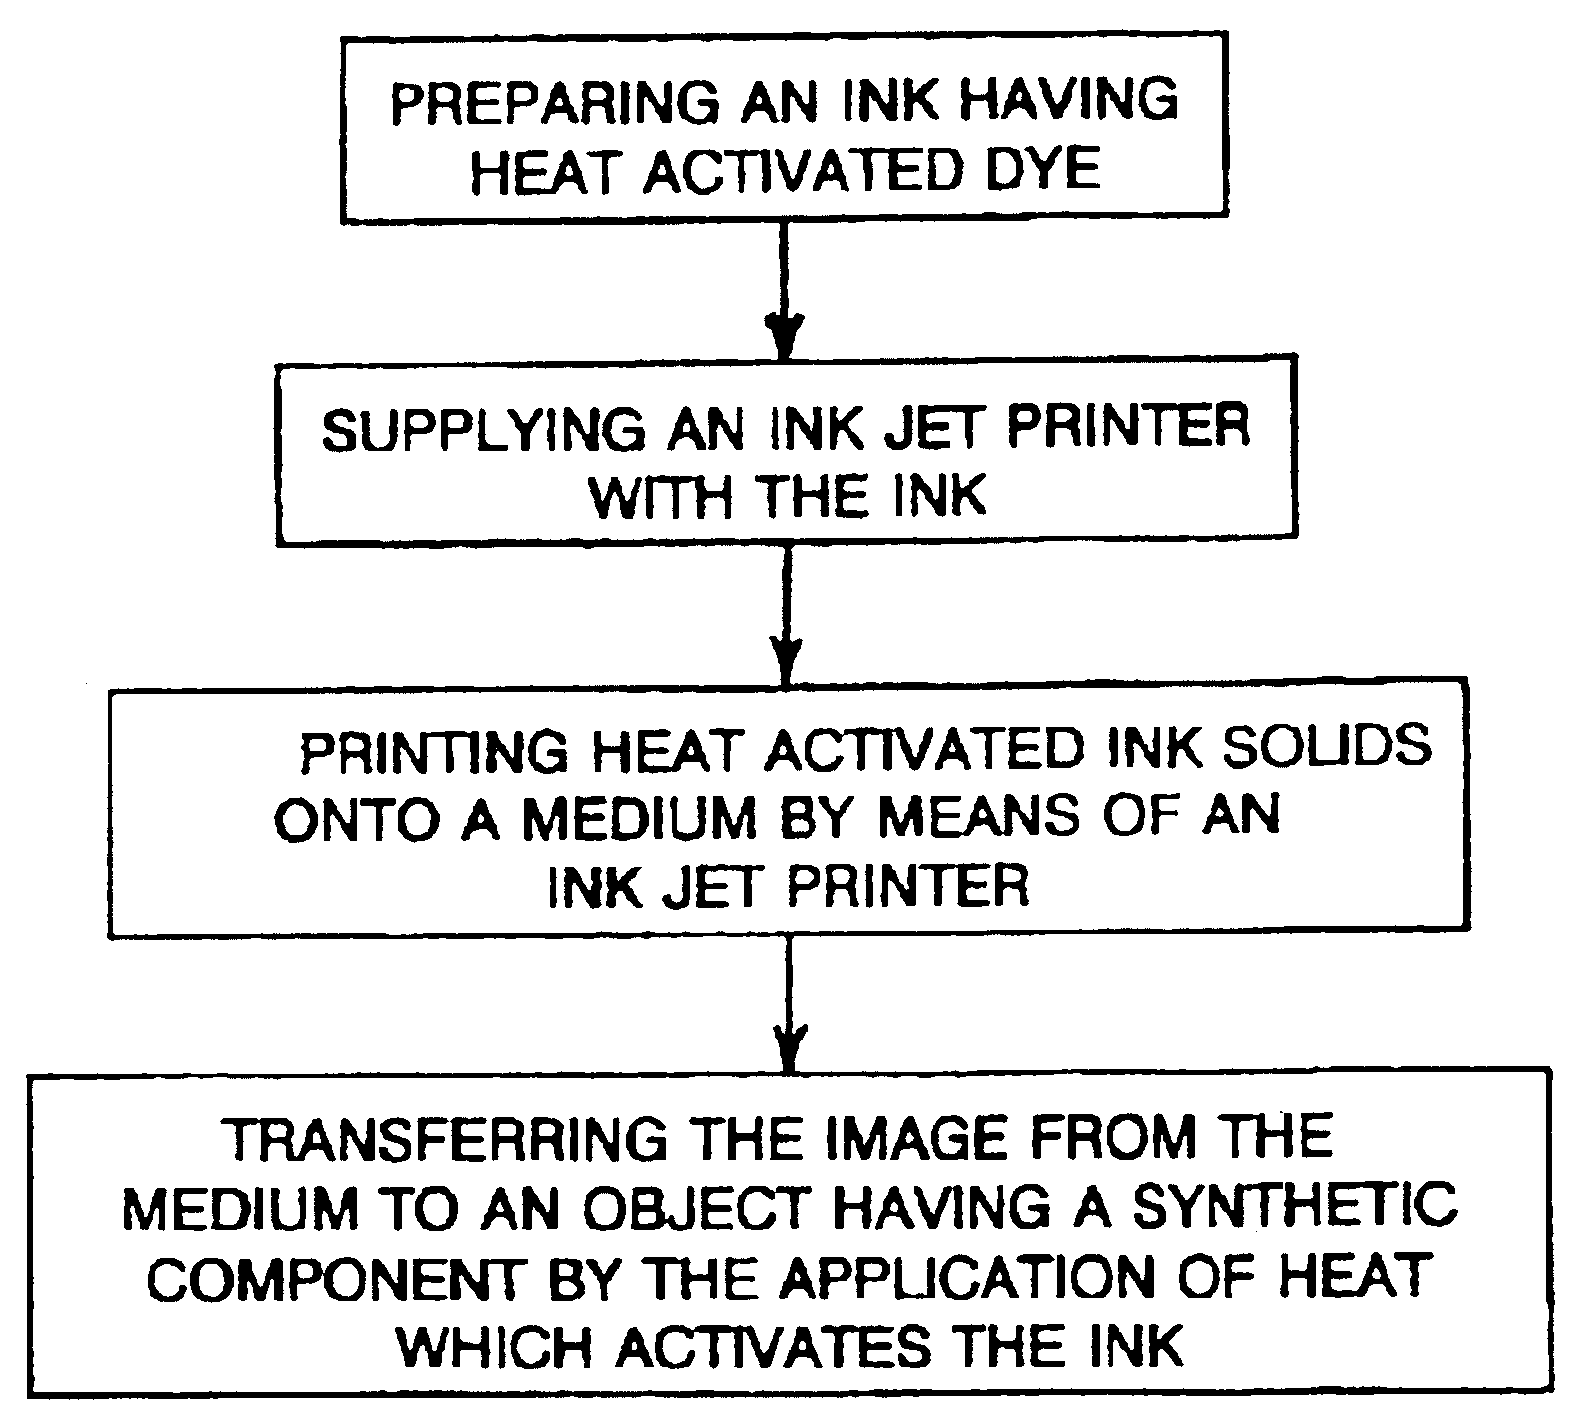 Permanent heat activated ink jet printing process